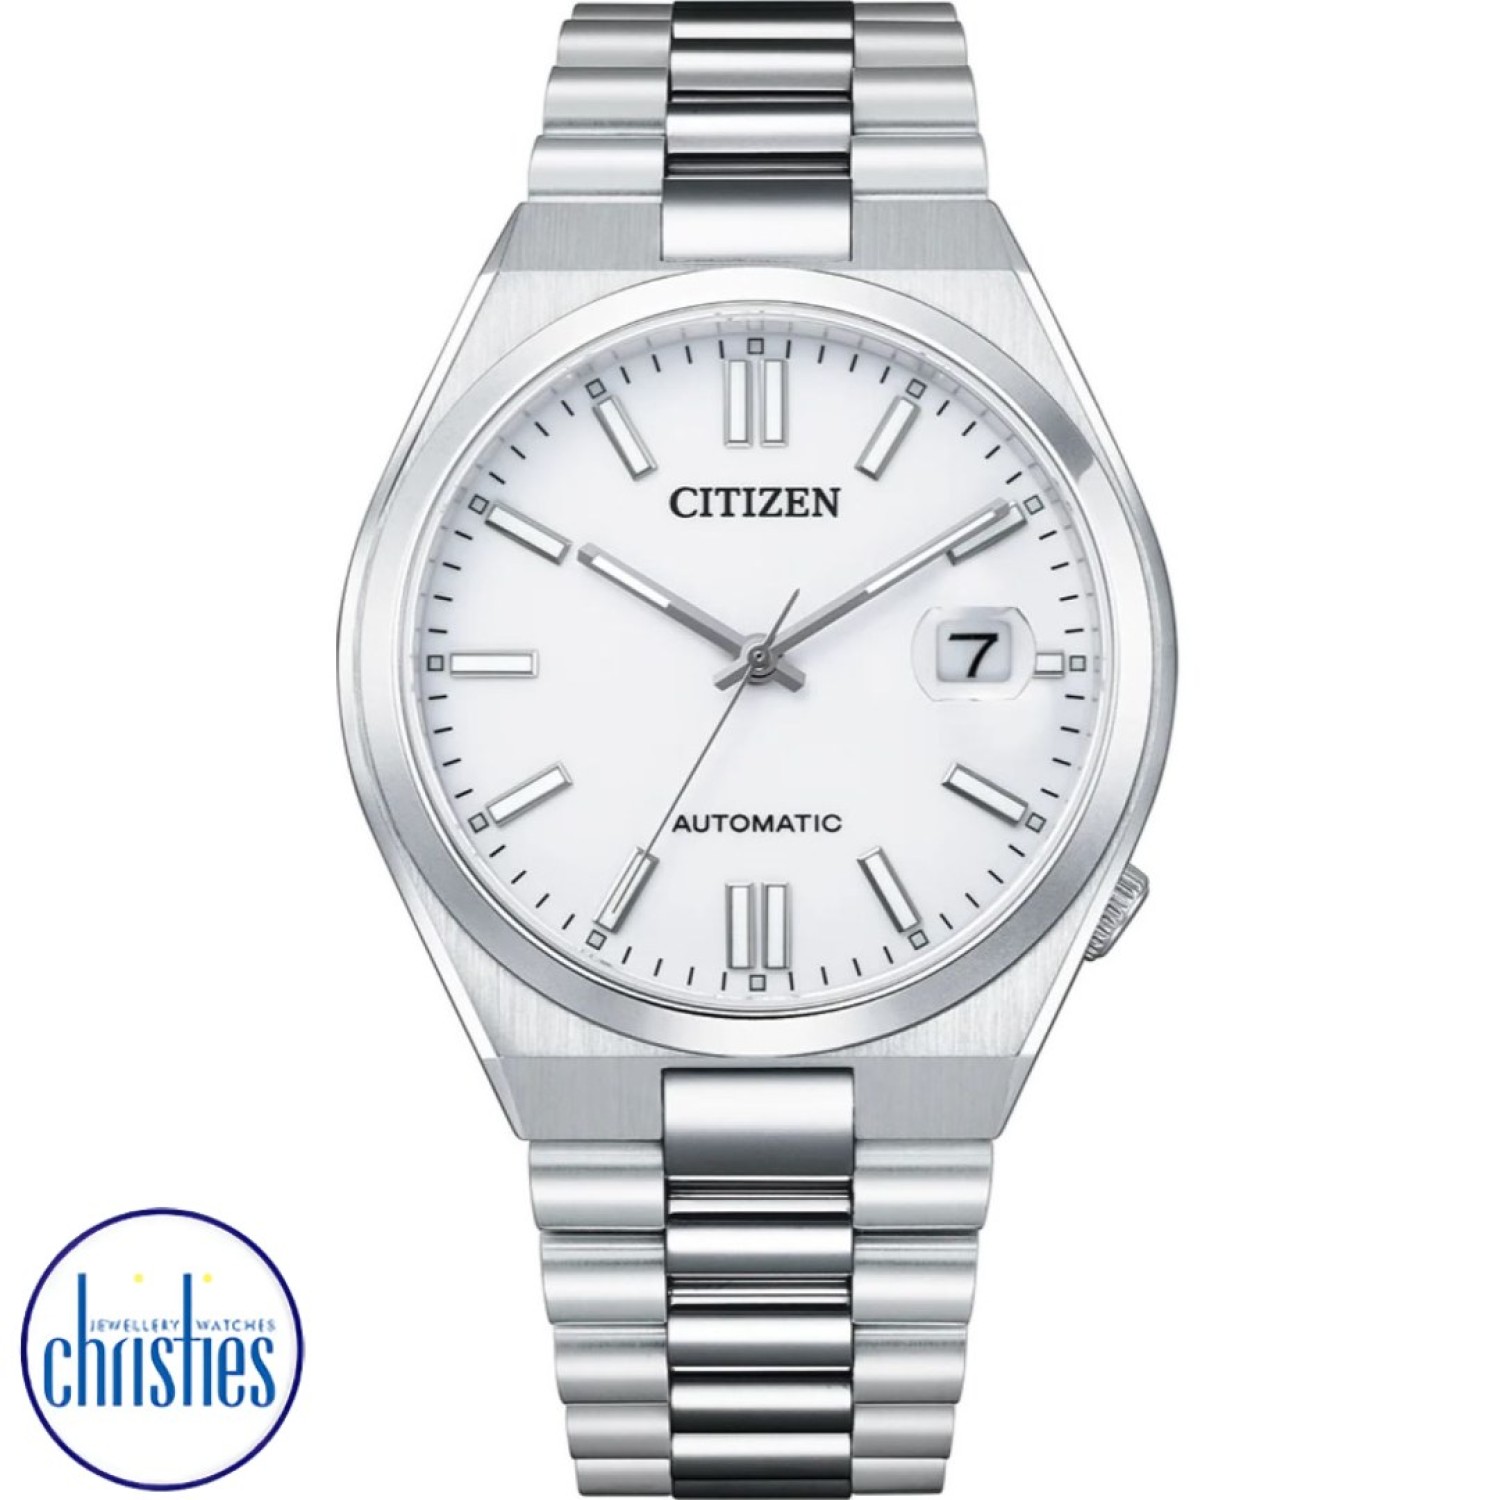 NJ0150-81A CITIZEN Automatic White Dial Watch NH8391-51L Watches Auckland